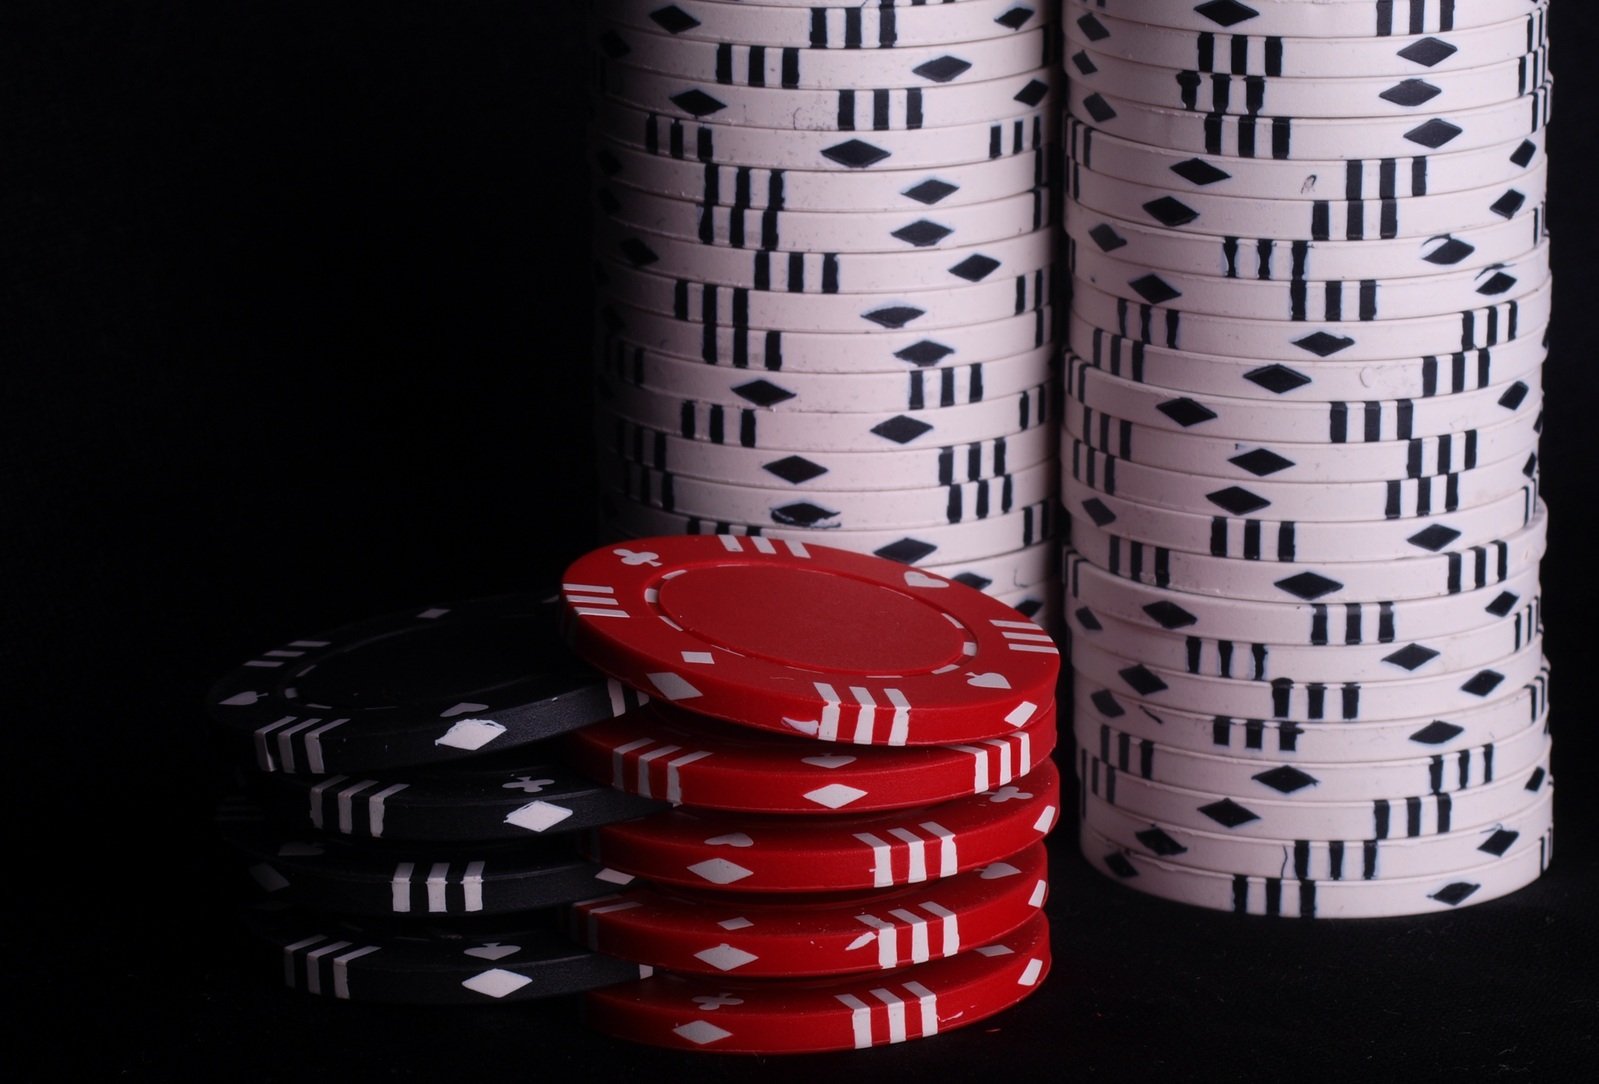 A Comprehensive Guide on How to Play Baccarat in 7 Easy Steps